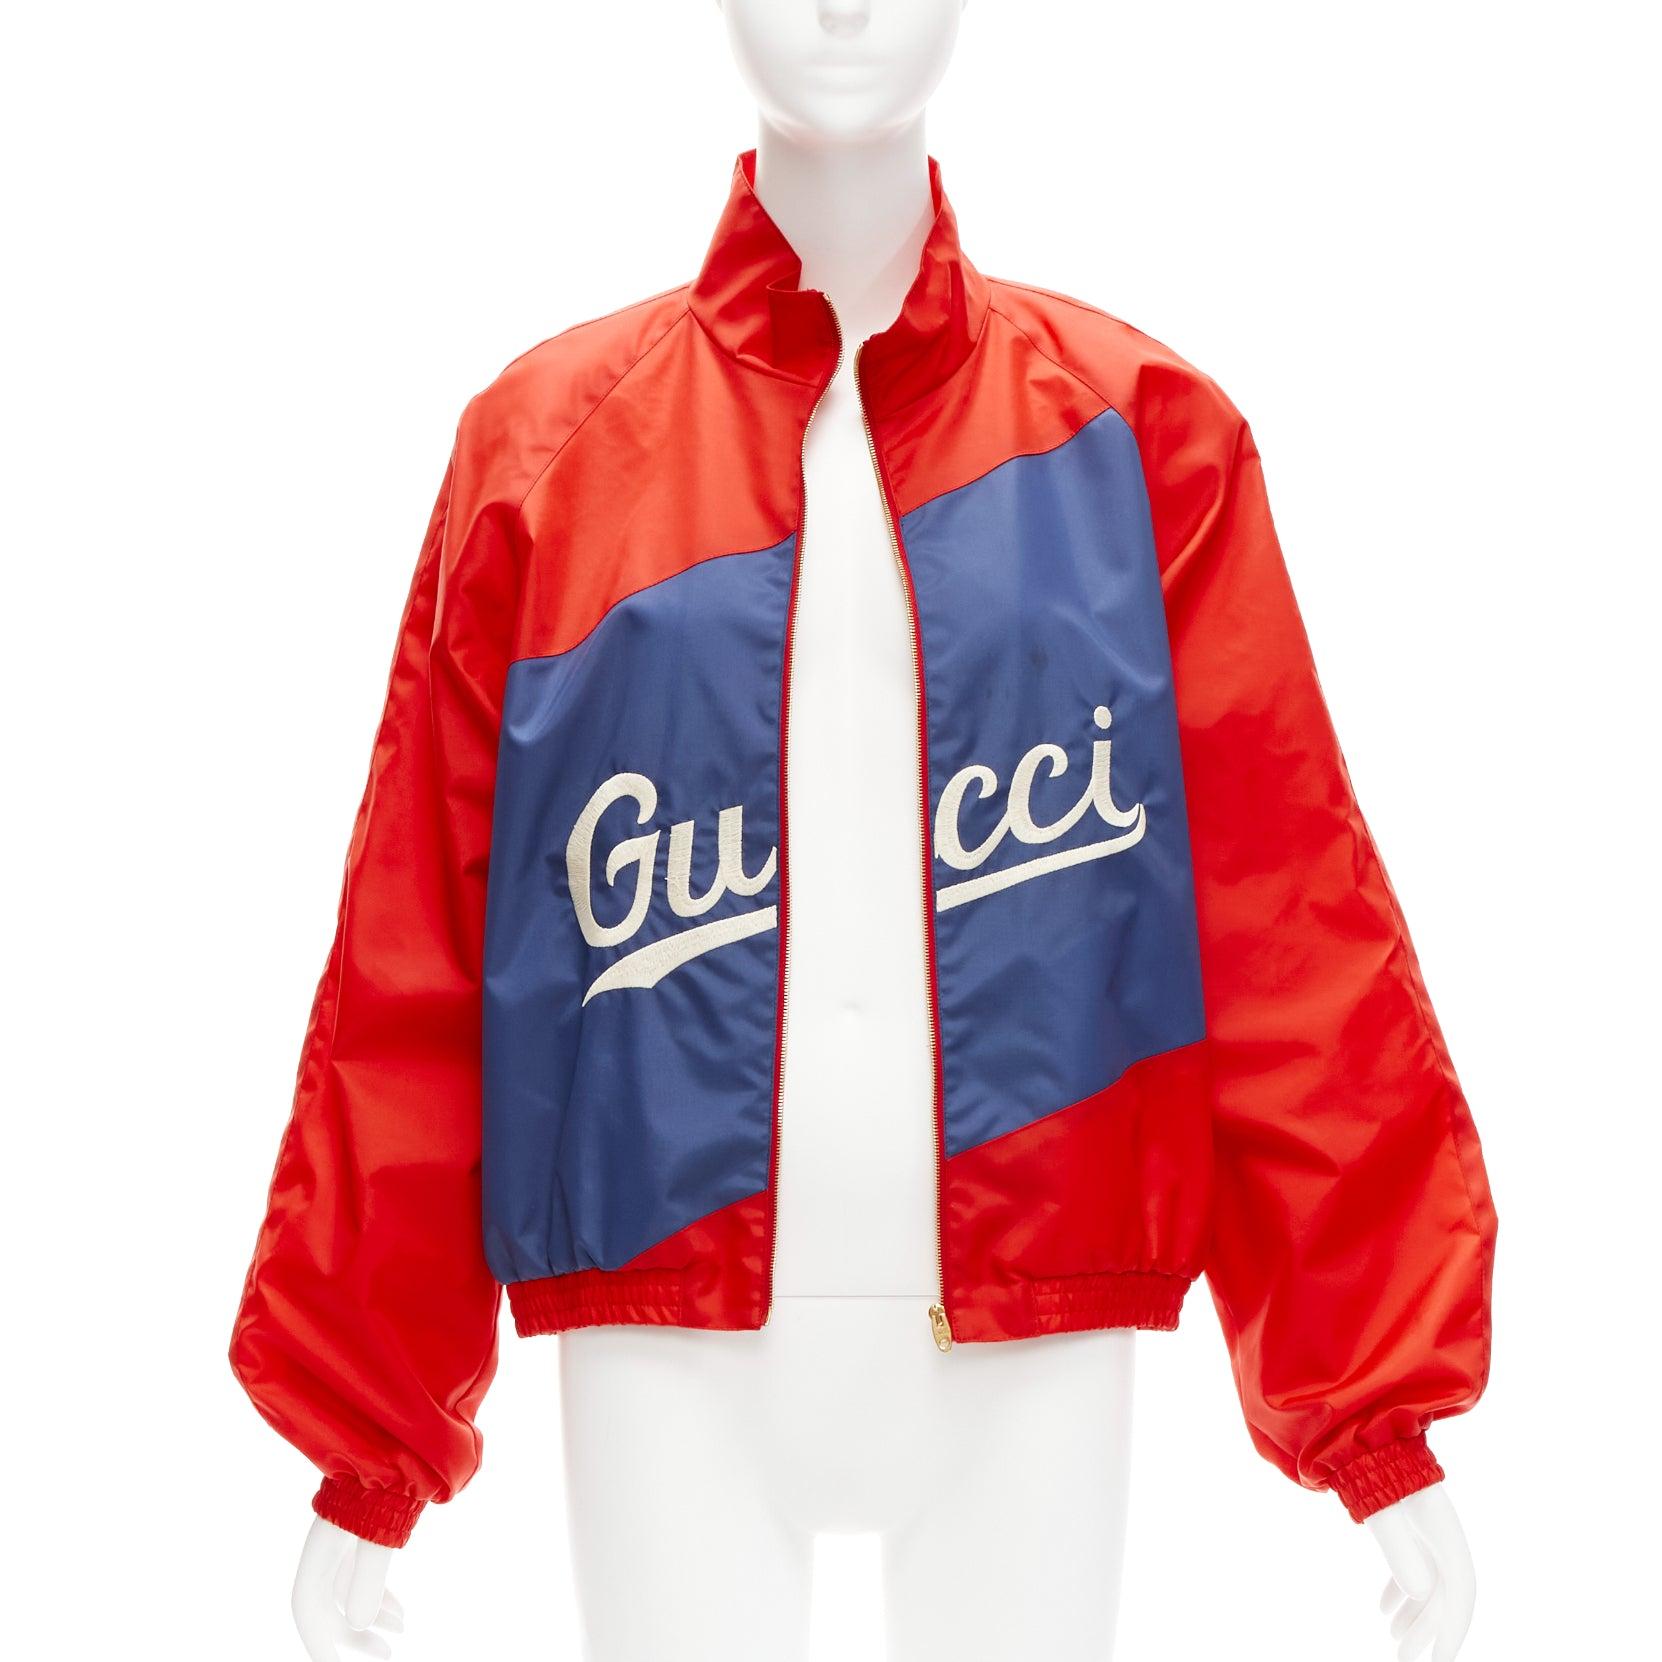 GUCCI 2020 Script logo red blue nylon track coach jacket IT44 L
Reference: TGAS/D00940
Brand: Gucci
Designer: Alessandro Michele
Collection: FW 2020
Material: Polyamide
Color: Red, Blue
Pattern: Solid
Closure: Zip
Lining: Red Fabric
Made in: